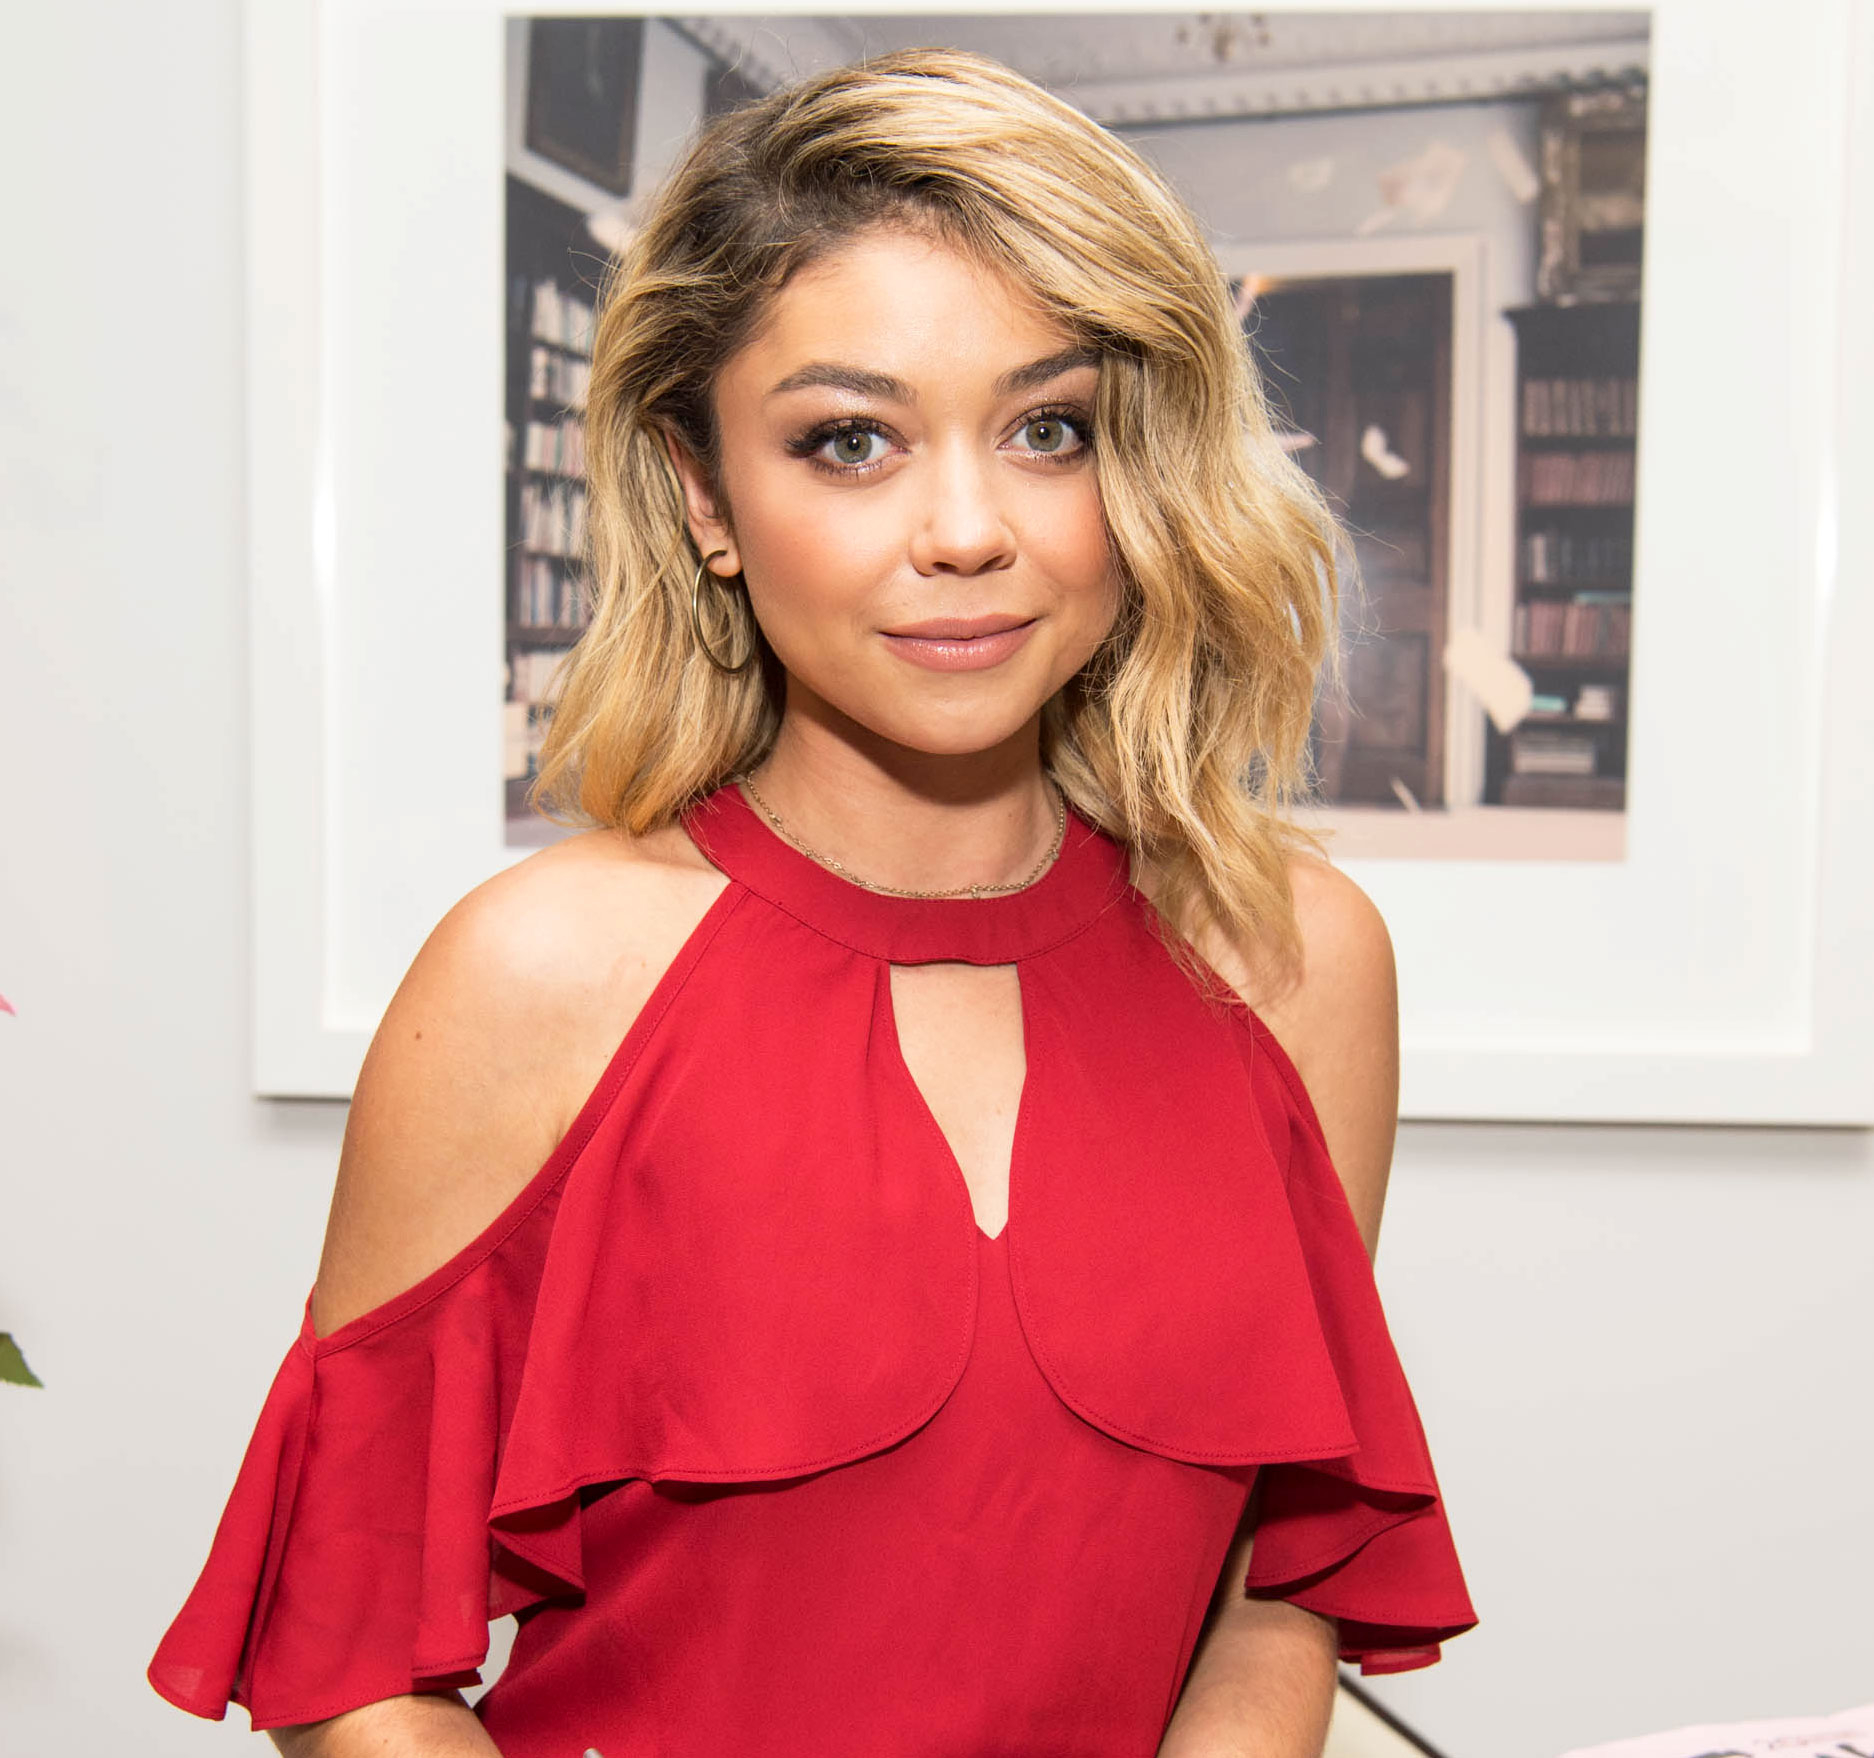 Sarah Hyland Dyes Her Hair Dark Red Brown And Adds Long Extensions